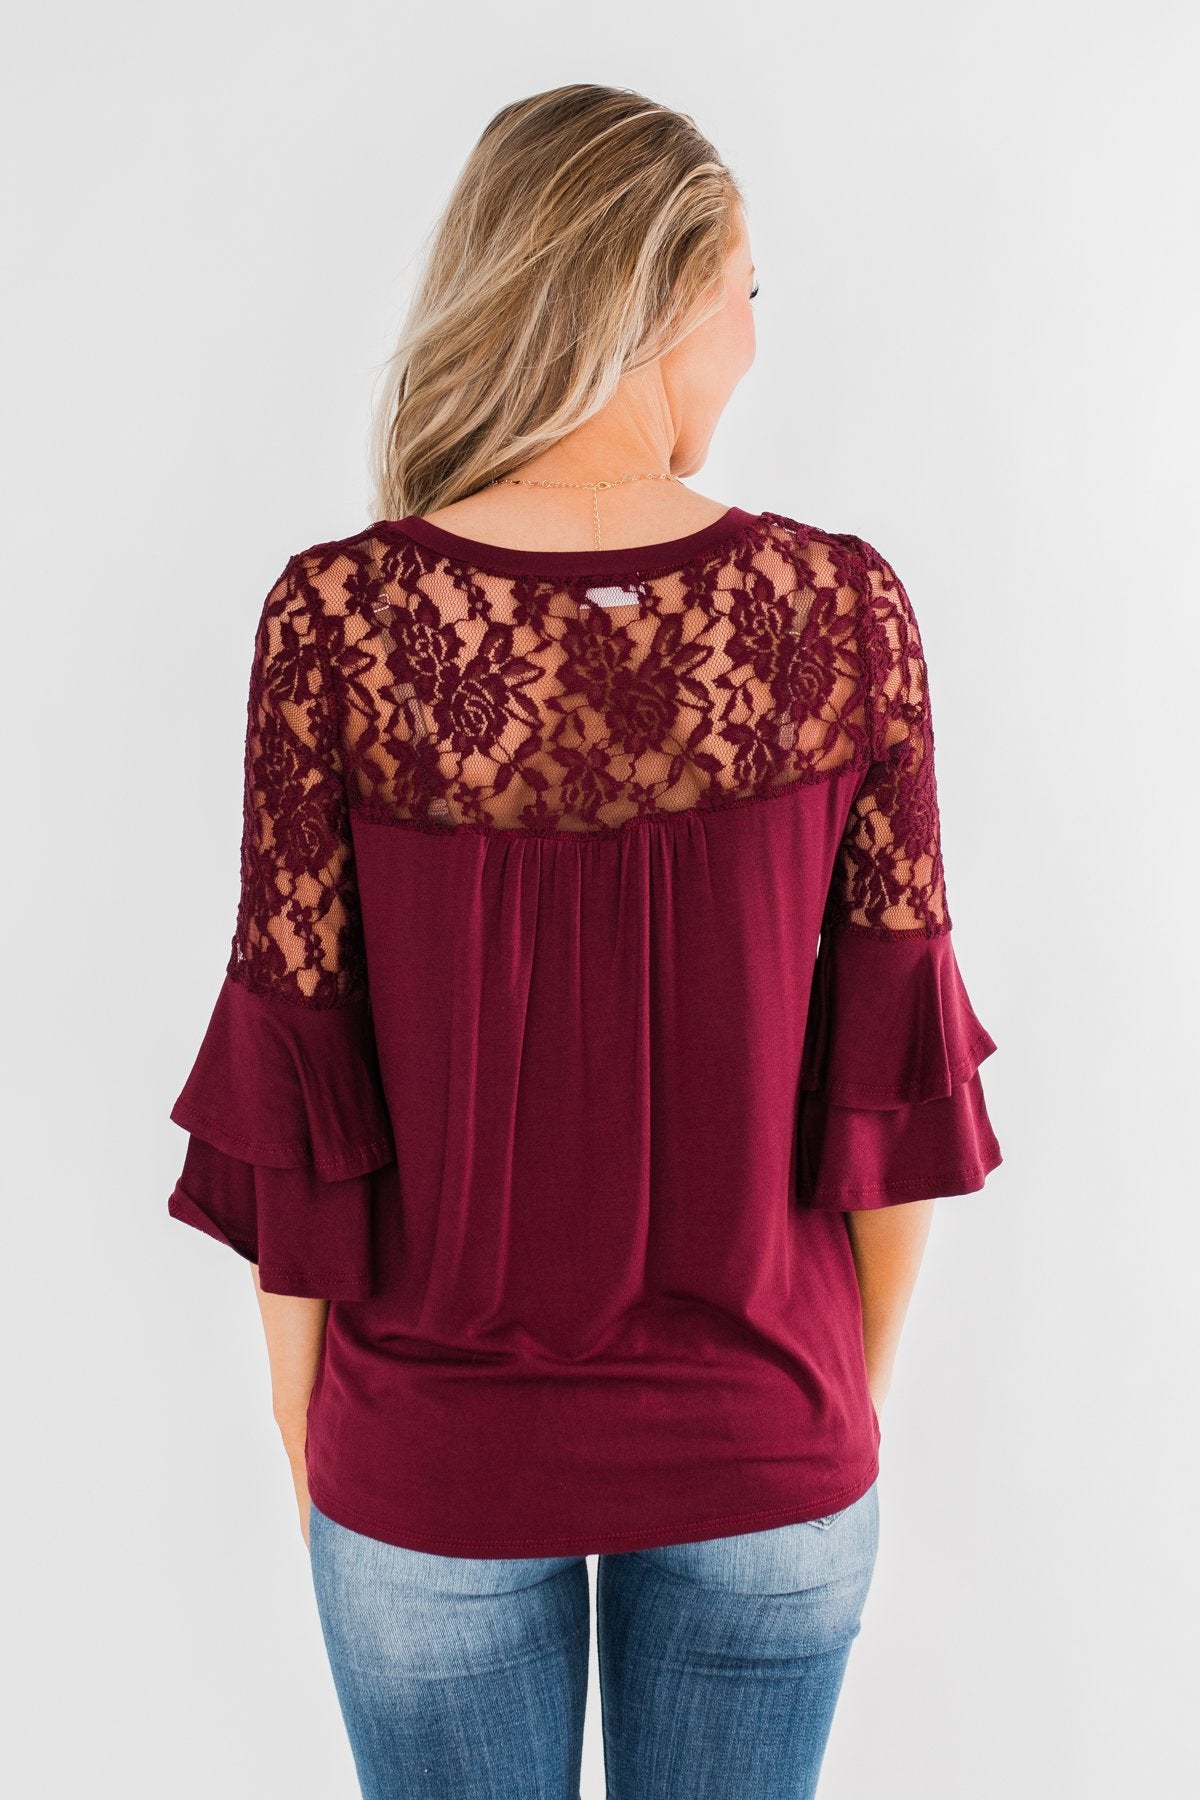 Right Beside Me Lace & Ruffles Top- Burgundy